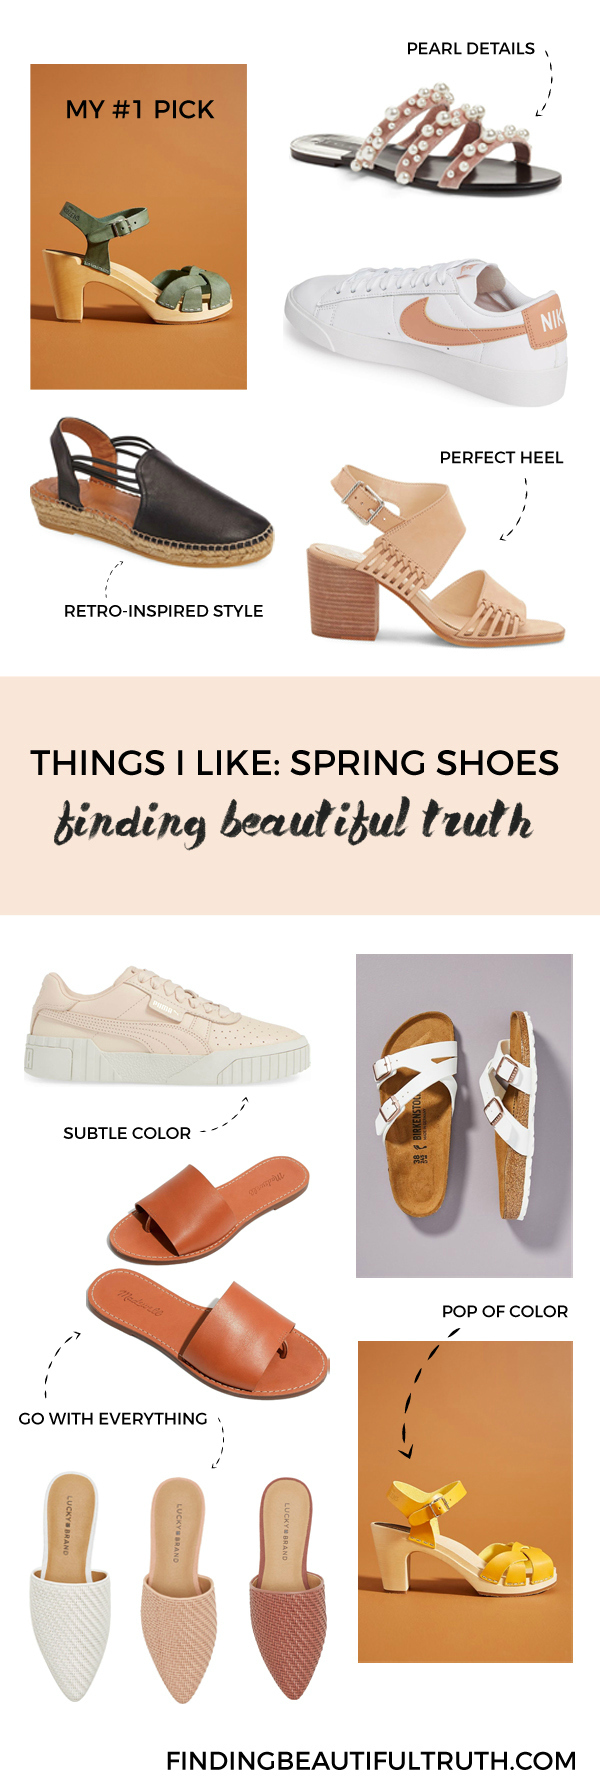 Things I Like: Spring Shoes - Finding Beautiful Truth